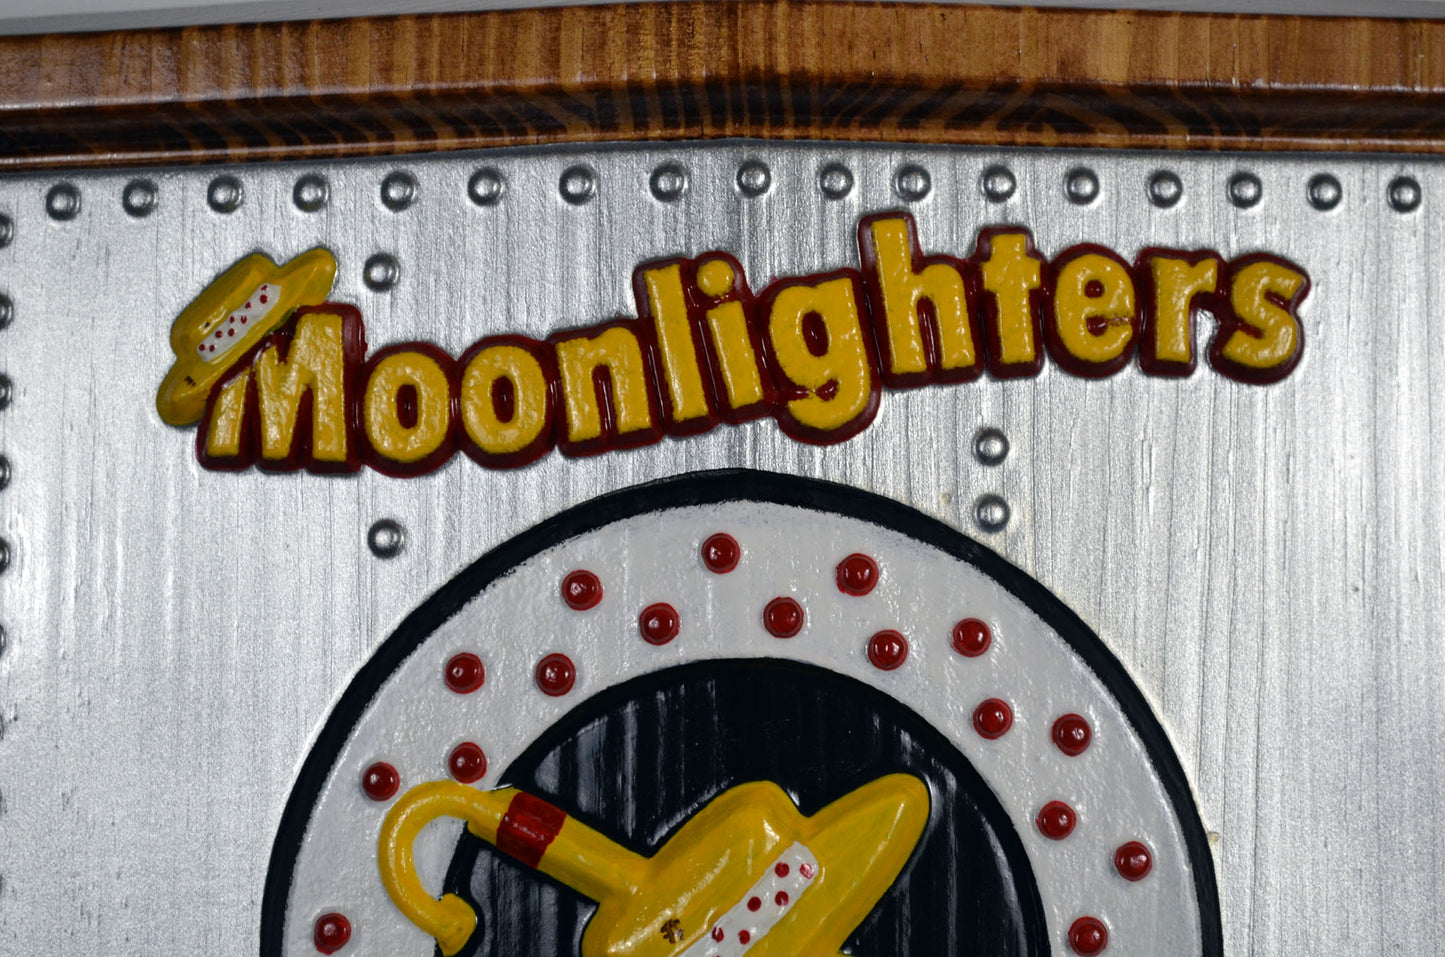 USMC All Weather Fighter Squadron VMFA-332, Moonlighters, CNC 3d wood carving, painted military plaque